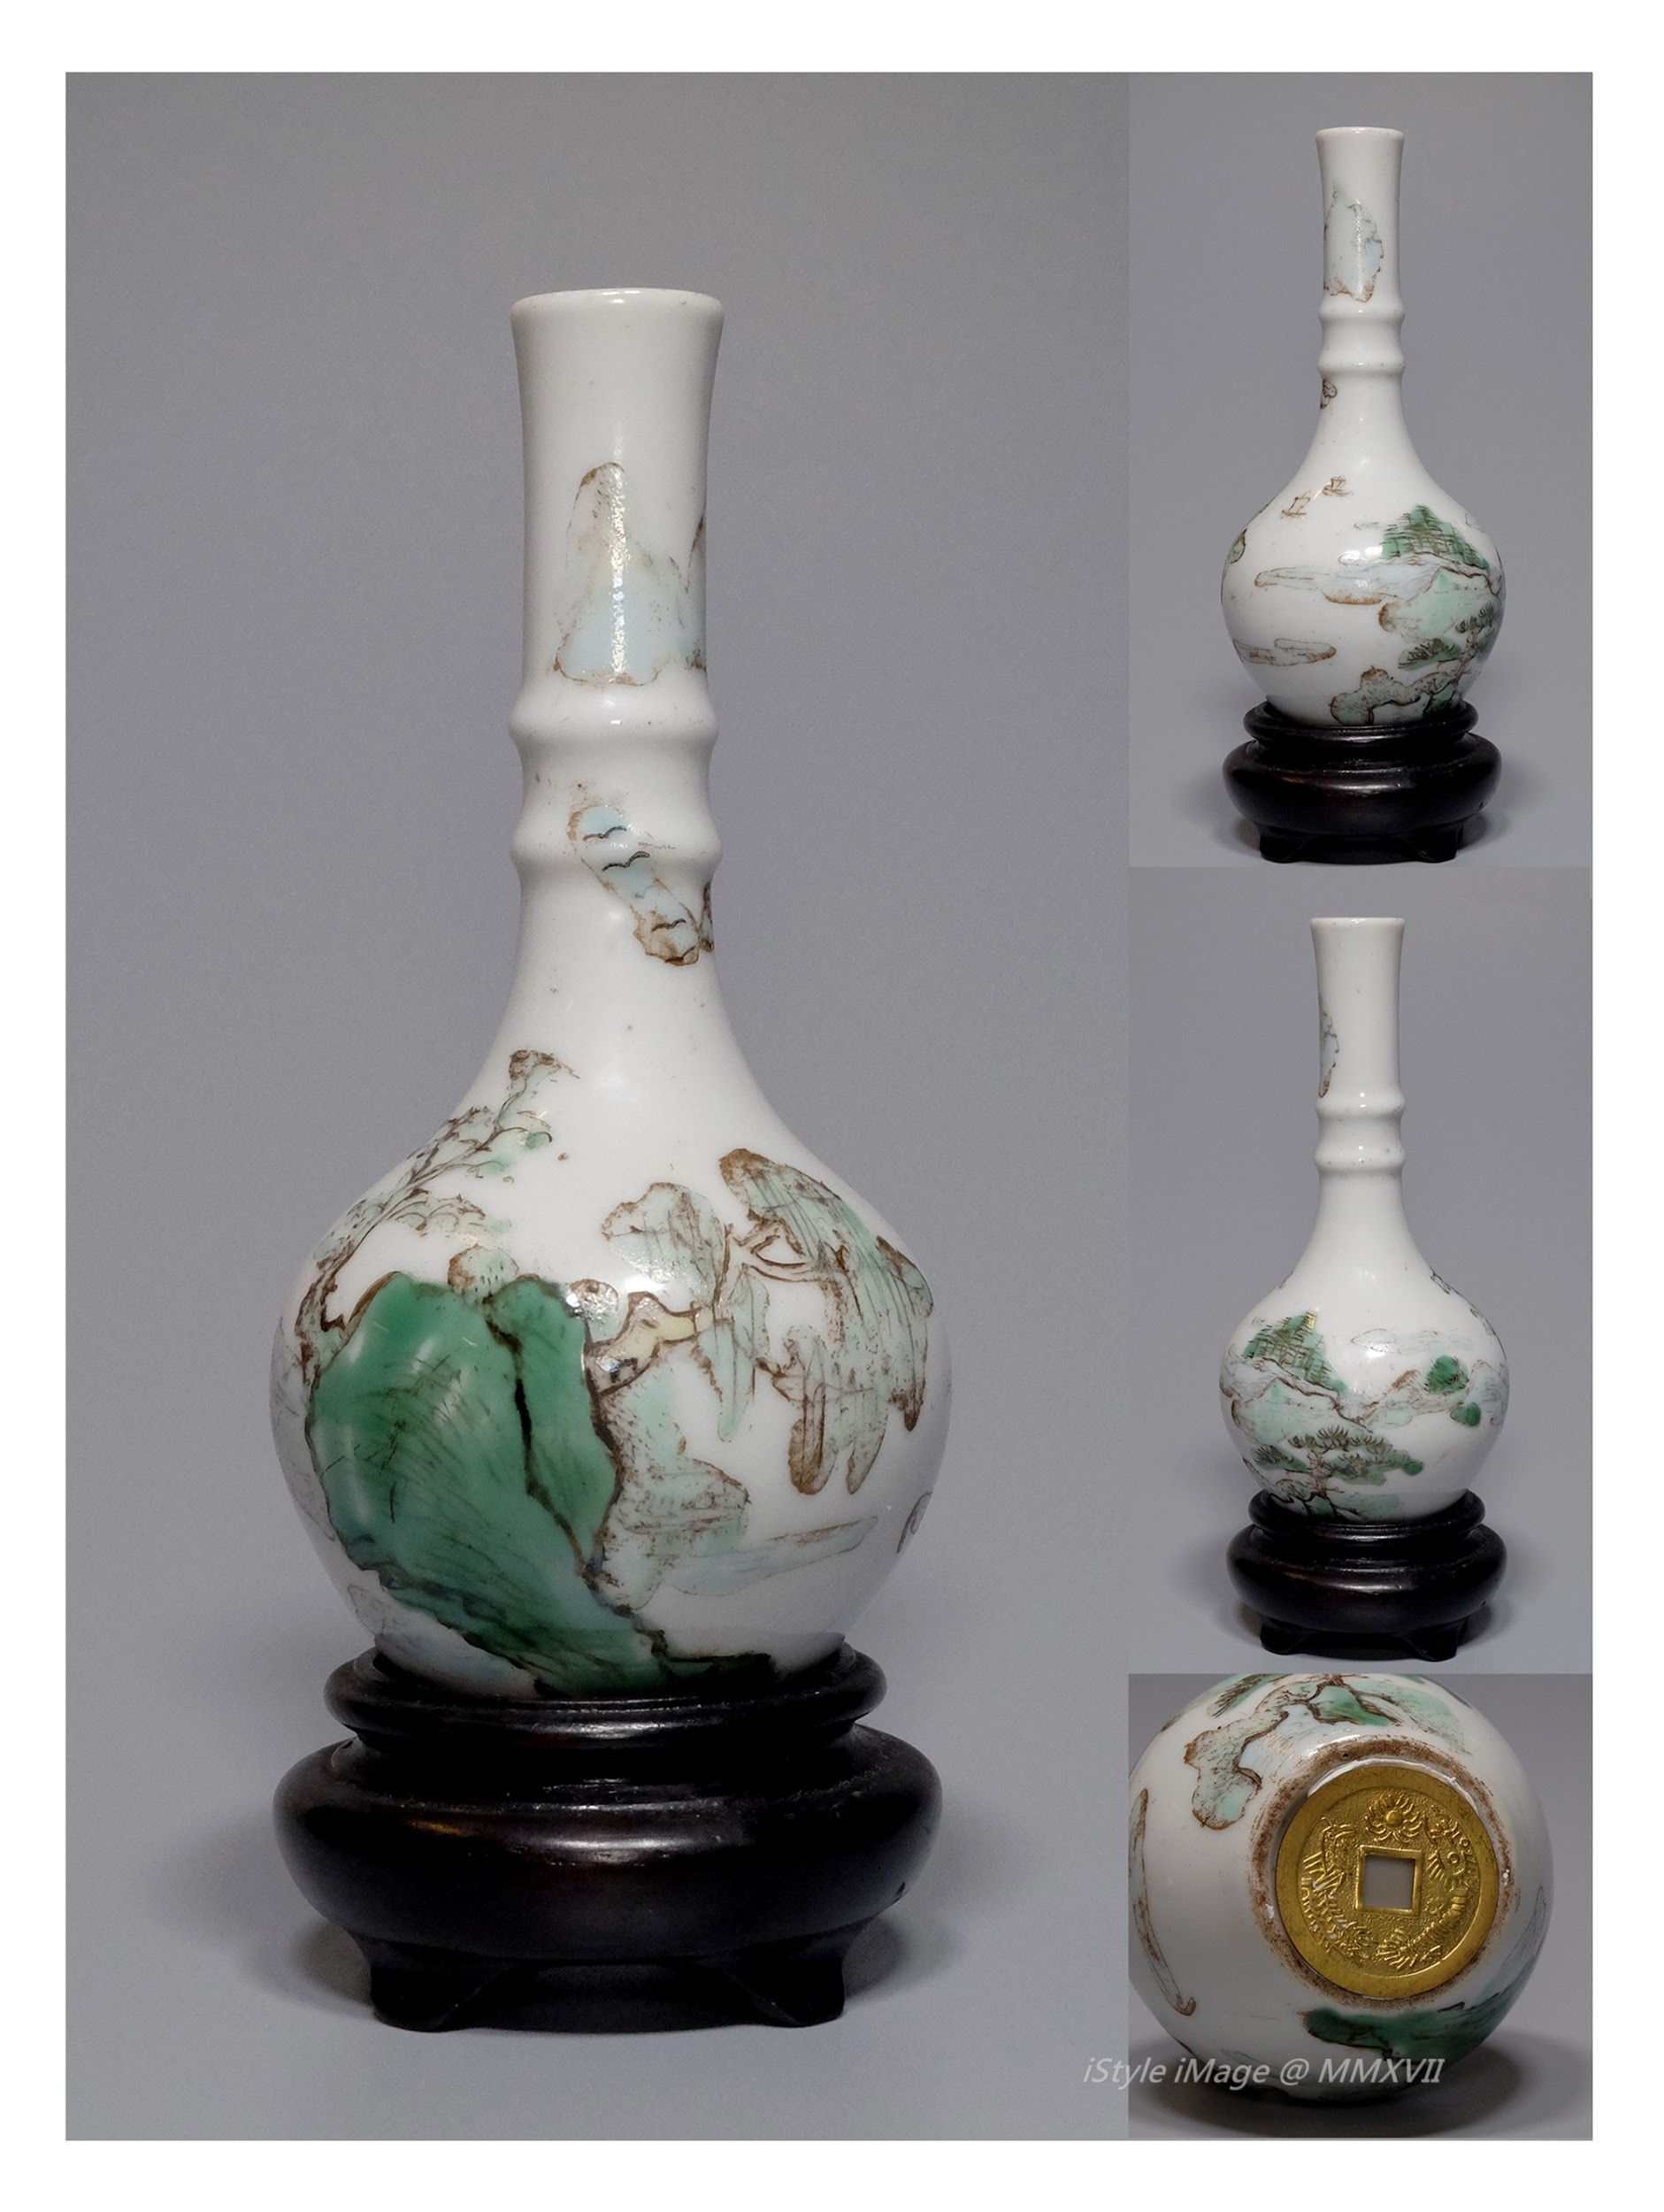 <br><h4>Lot 3 : An unusual Famille-rose bamboo neck landscape vase  ( 50's last century )</h4>
							The compressed globular body to a long, elegant 'bamboo' (means to victory, adhere to justice, anyone with very high culture, taste and cultivation standards). Waisted cylinder neck, delicately enameled surround the body with beautiful landscape scene, with a coin under the foot base added after 80's last century.
							<br>Measurements (H) high 11 CM, (W)width 5 CM<br><br><br>一個精緻不凡的粉彩竹節風景花瓶 (上世紀五十年代 )<br>球體瓶身上升到長而優雅的“竹節”頸部（意味著勝利，堅持正義，任何有高文化，品味和修養的人)。精美粉彩風景畫圍繞瓶身，一枚硬幣在瓶底在上世紀八十年代附加。<br>尺寸(H)高 11 厘米,  (W)濶5 厘米